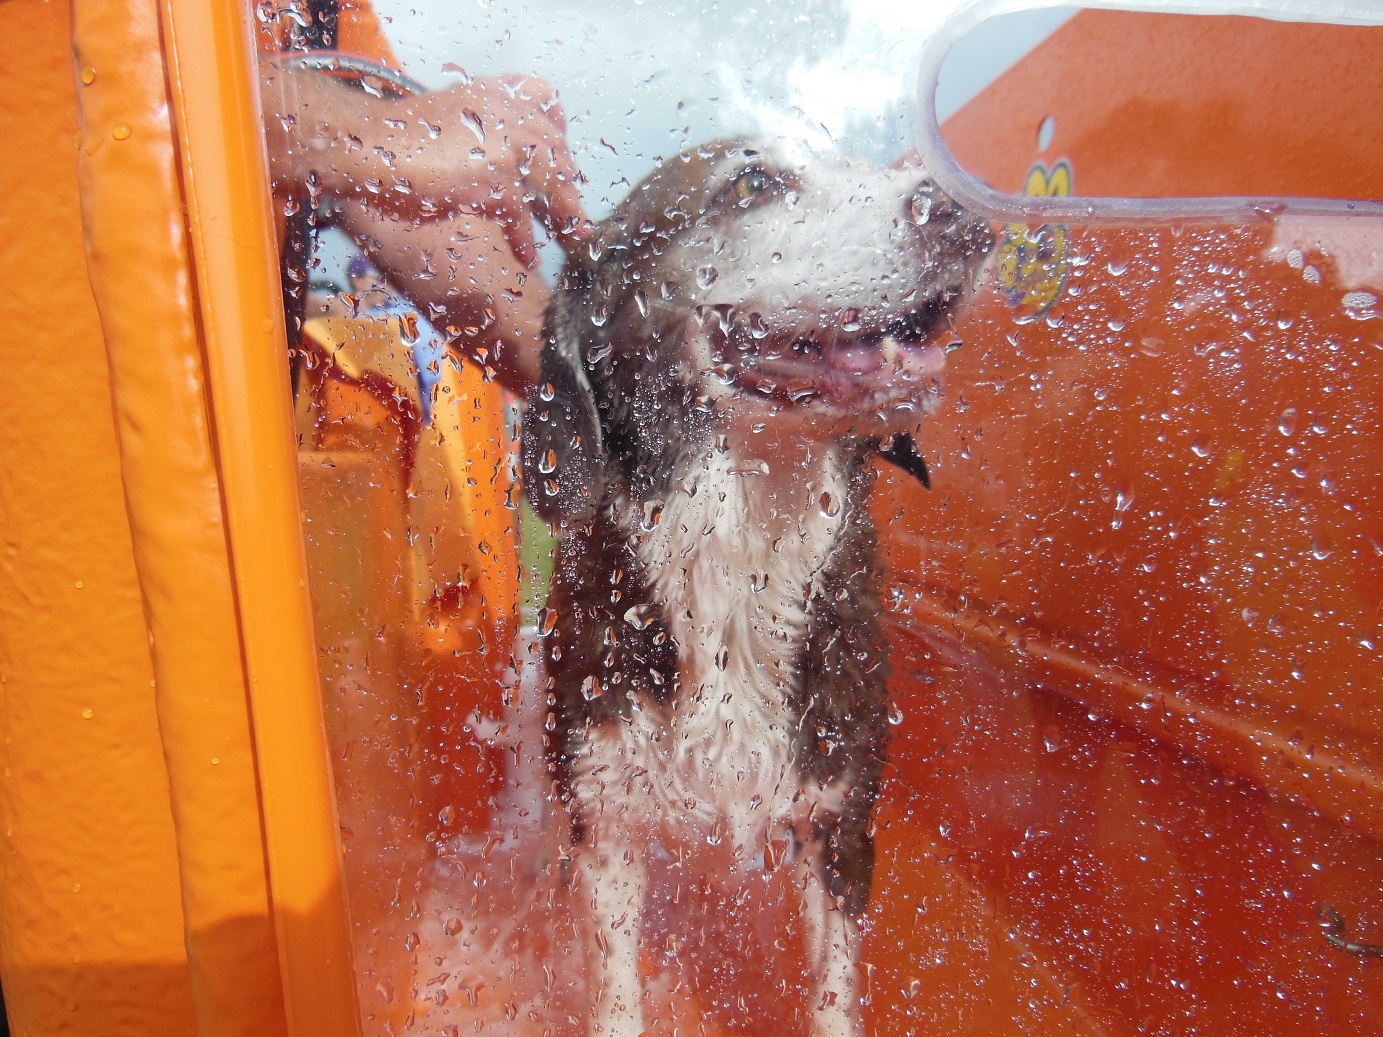 City Farmers Mobile Dog Wash South West available...Business For Sale